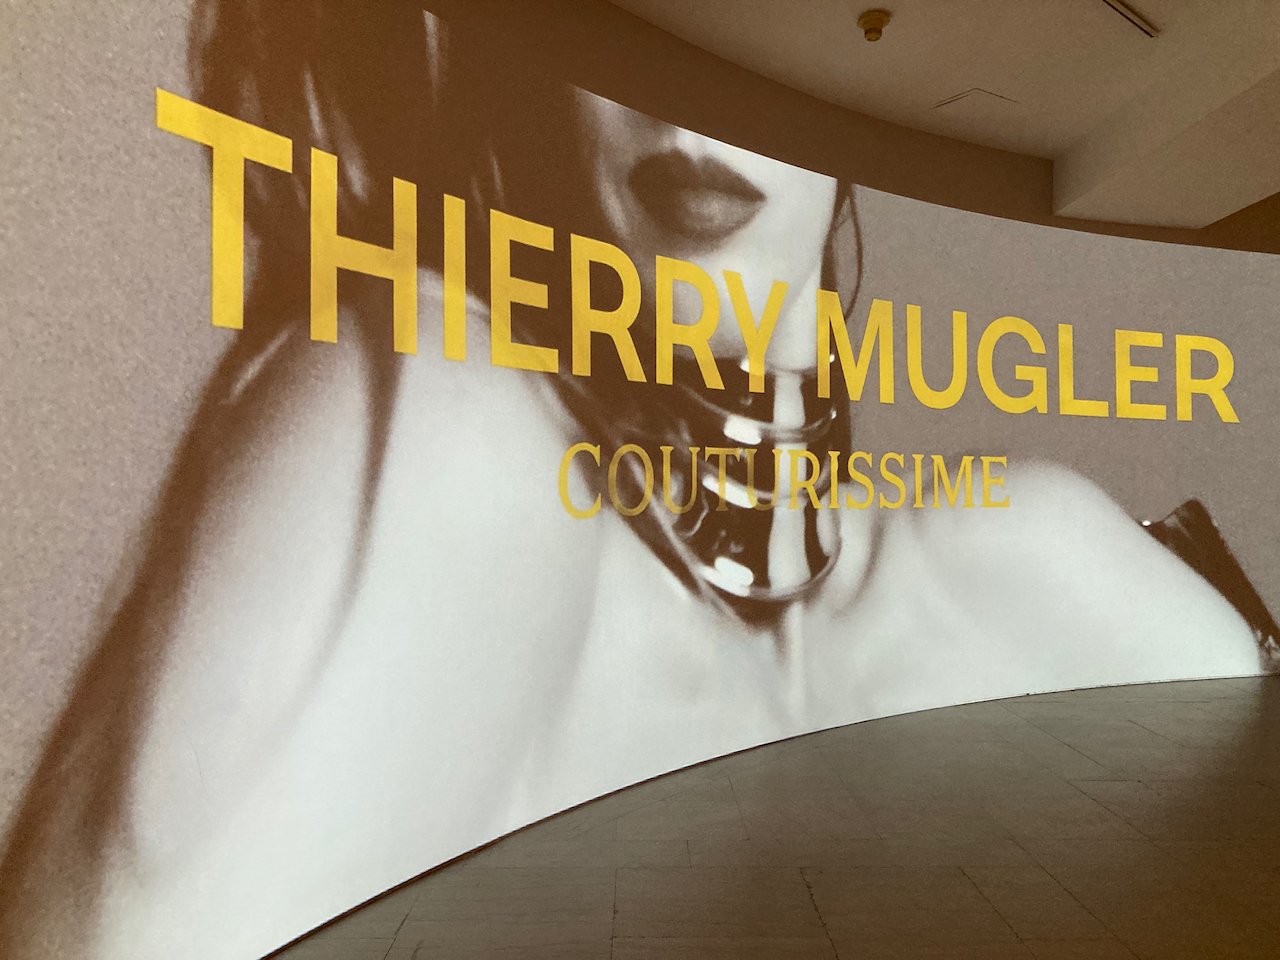 Design Legend Thierry Mugler Launches Couturissime Exhibition -  EcoLux☆Lifestyle